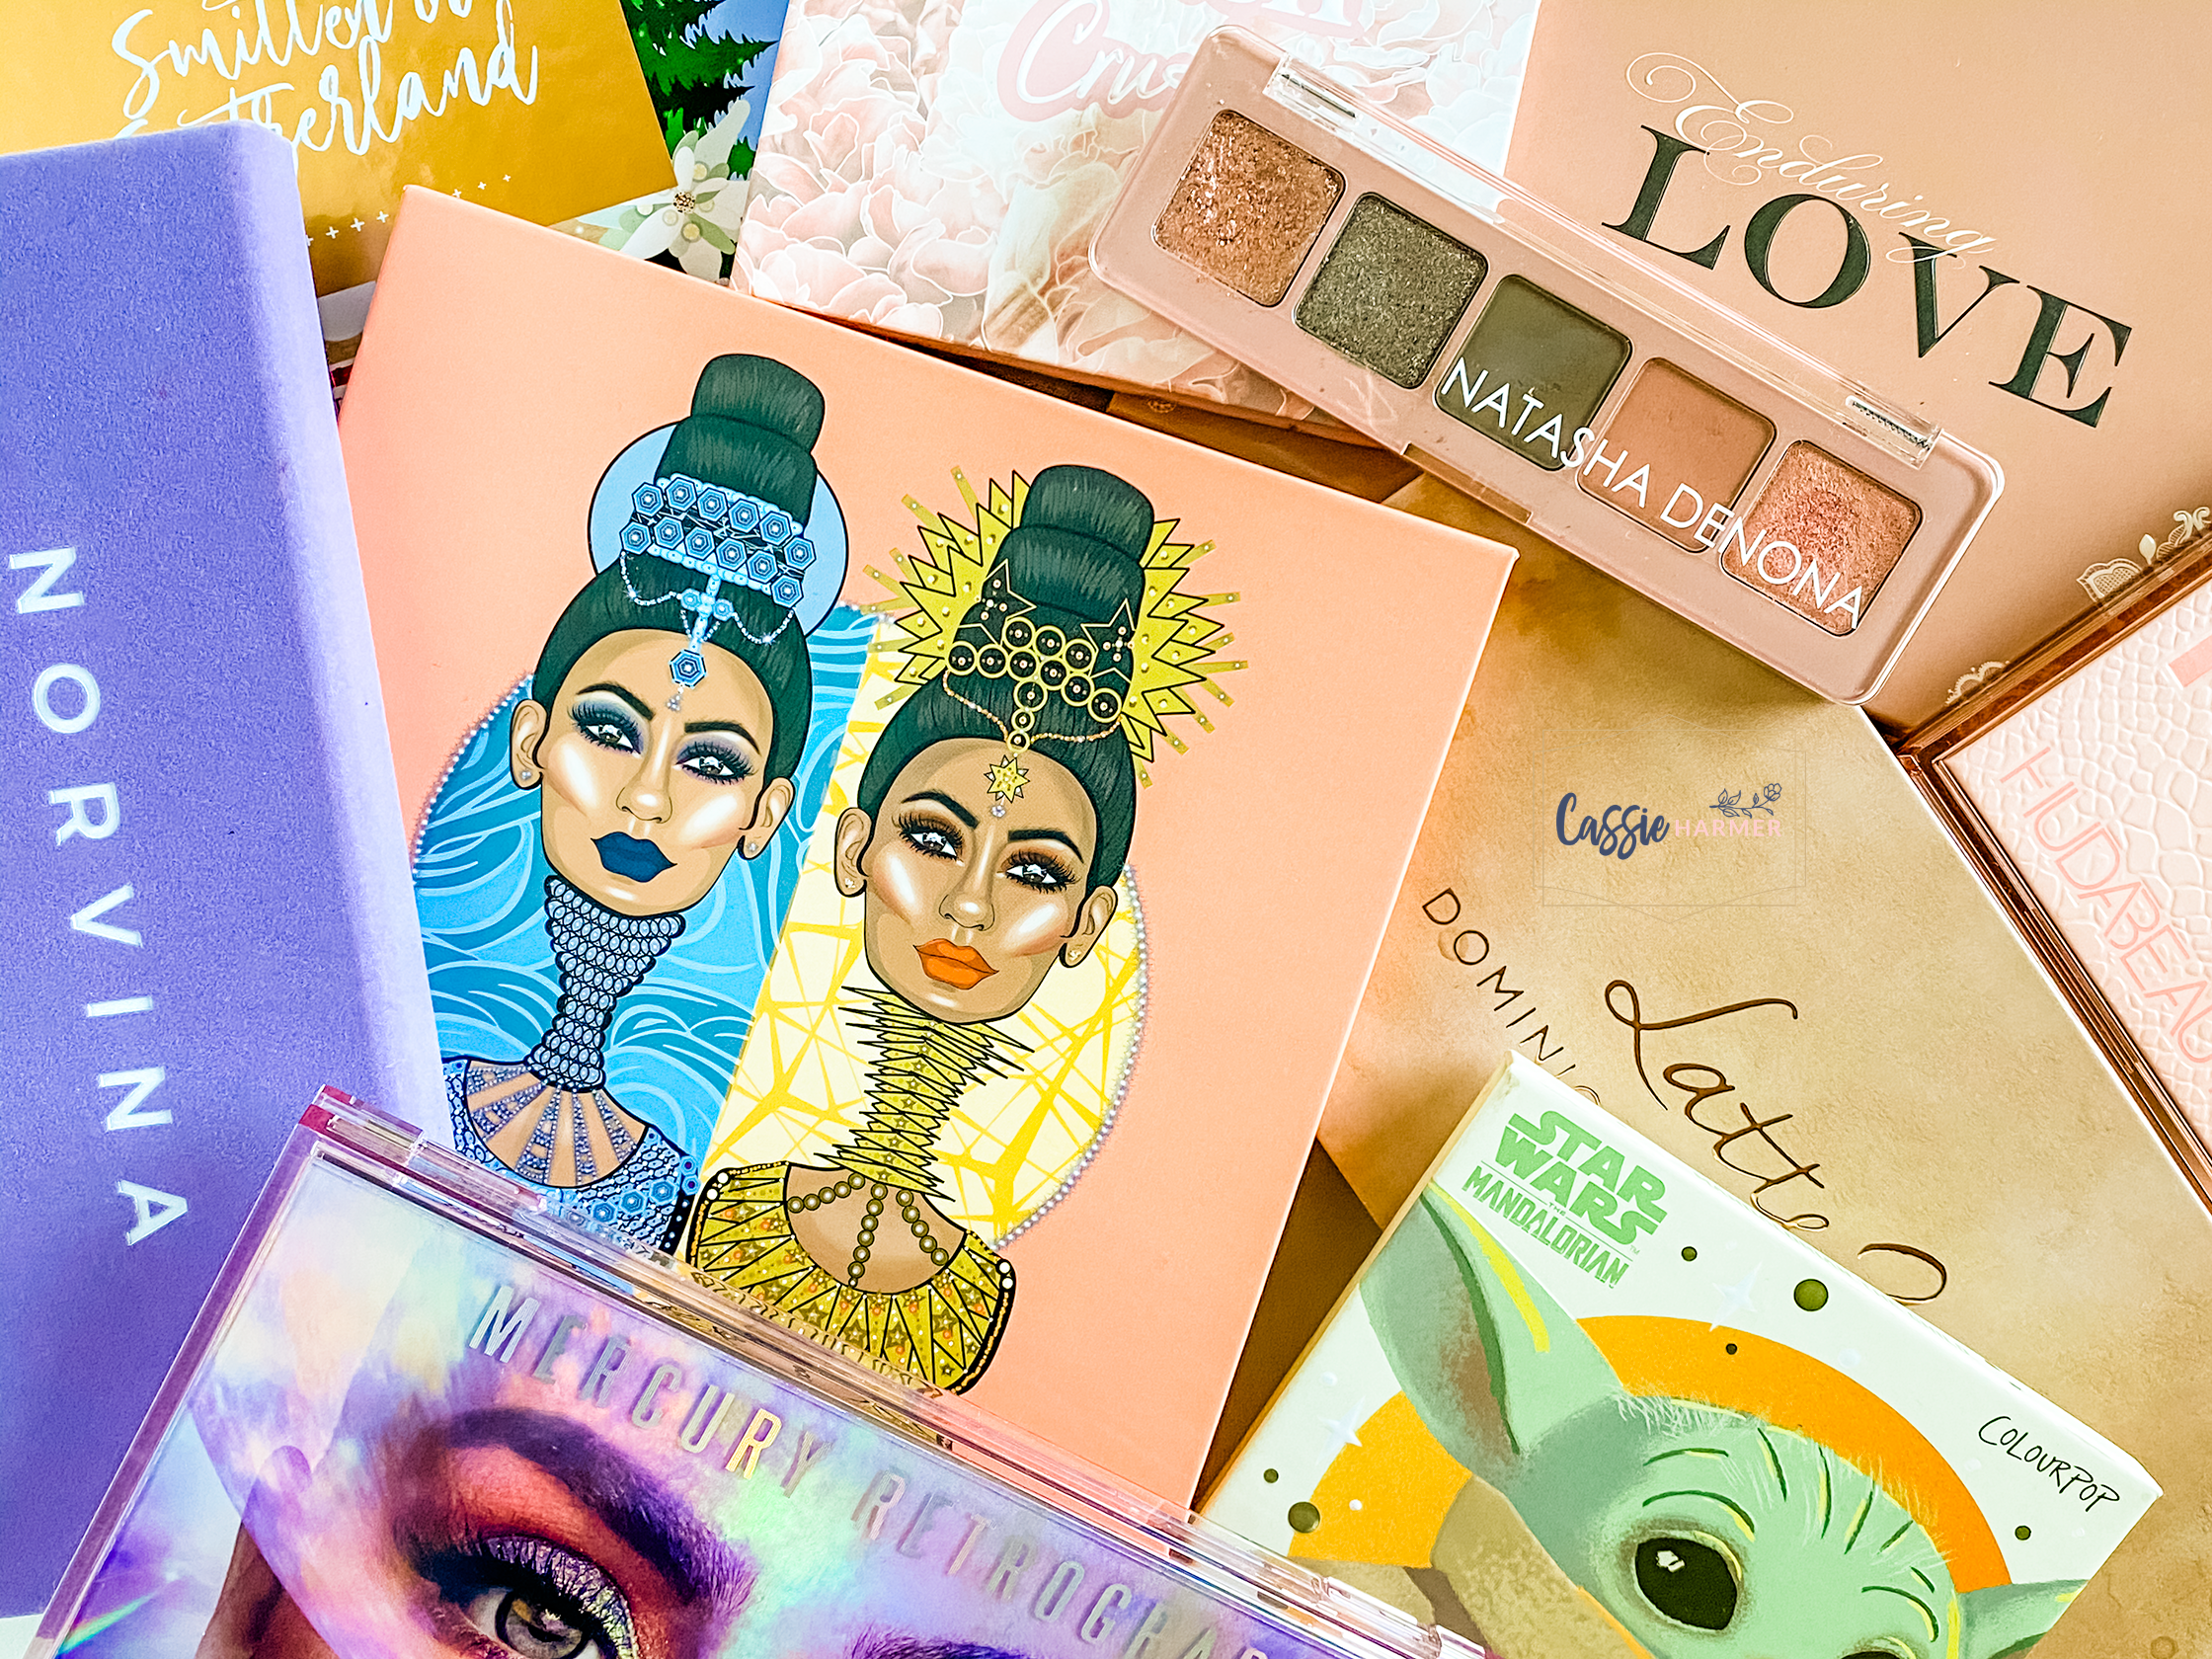 Best Eyeshadow Palettes for Spring | Best & Worst of Beauty